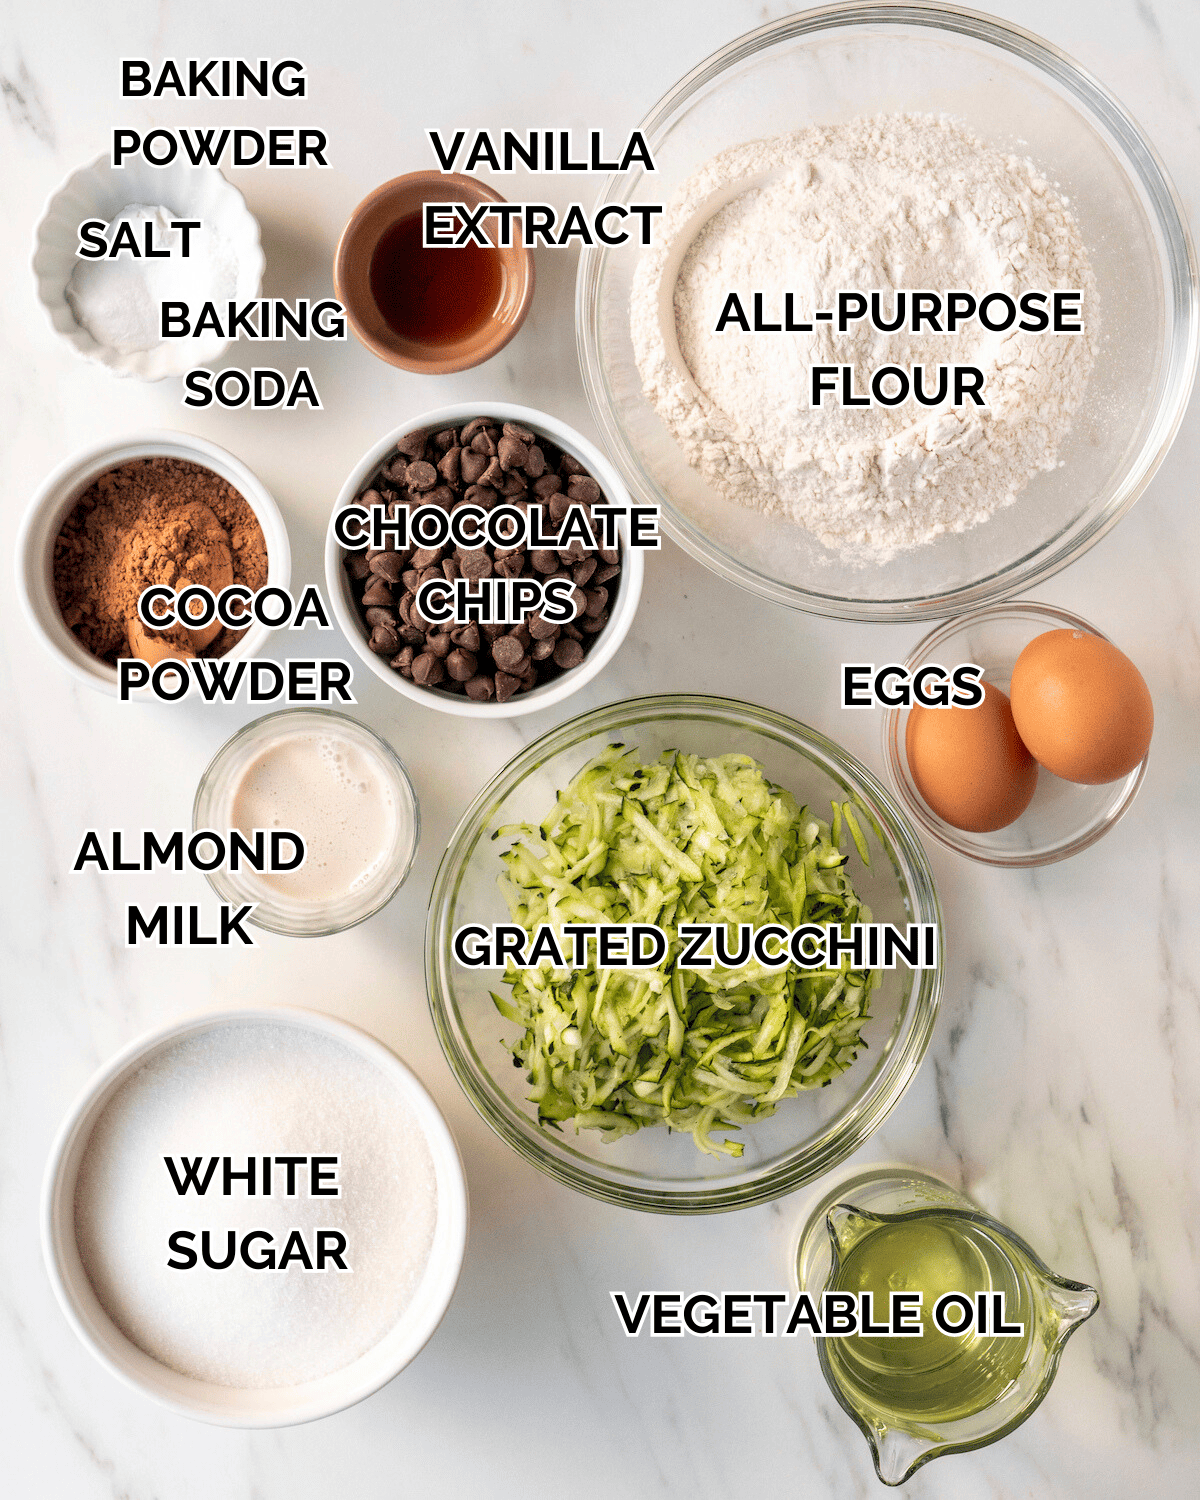 mise-en-place with all the ingredients required to make double chocolate chip zucchini bread